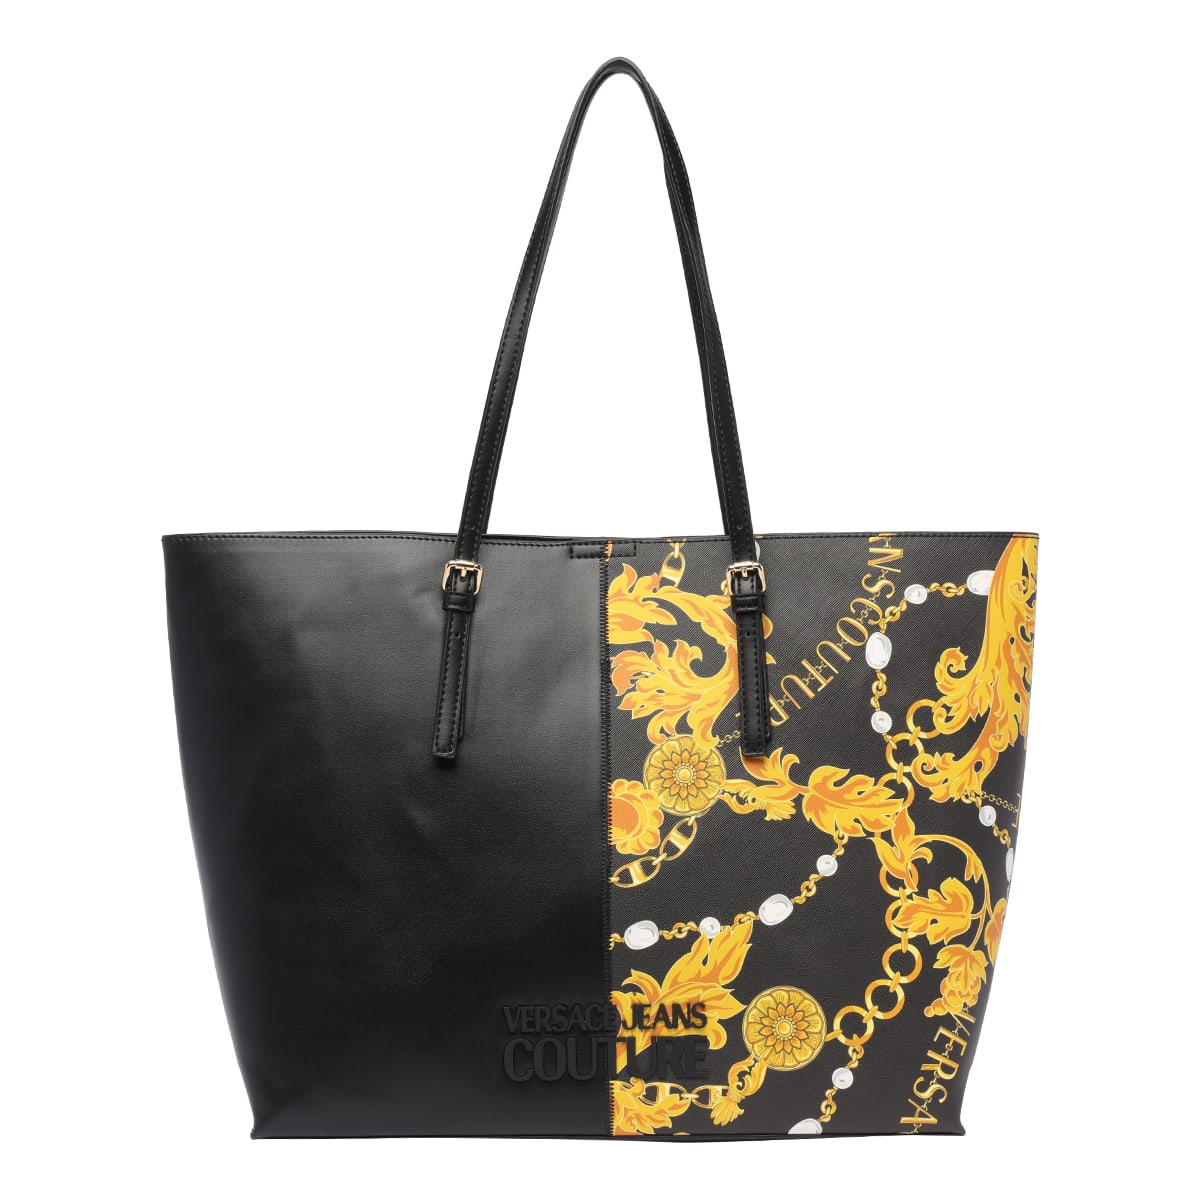 VERSACE JEANS COUTURE CHAIN COUTURE TOTE BAG